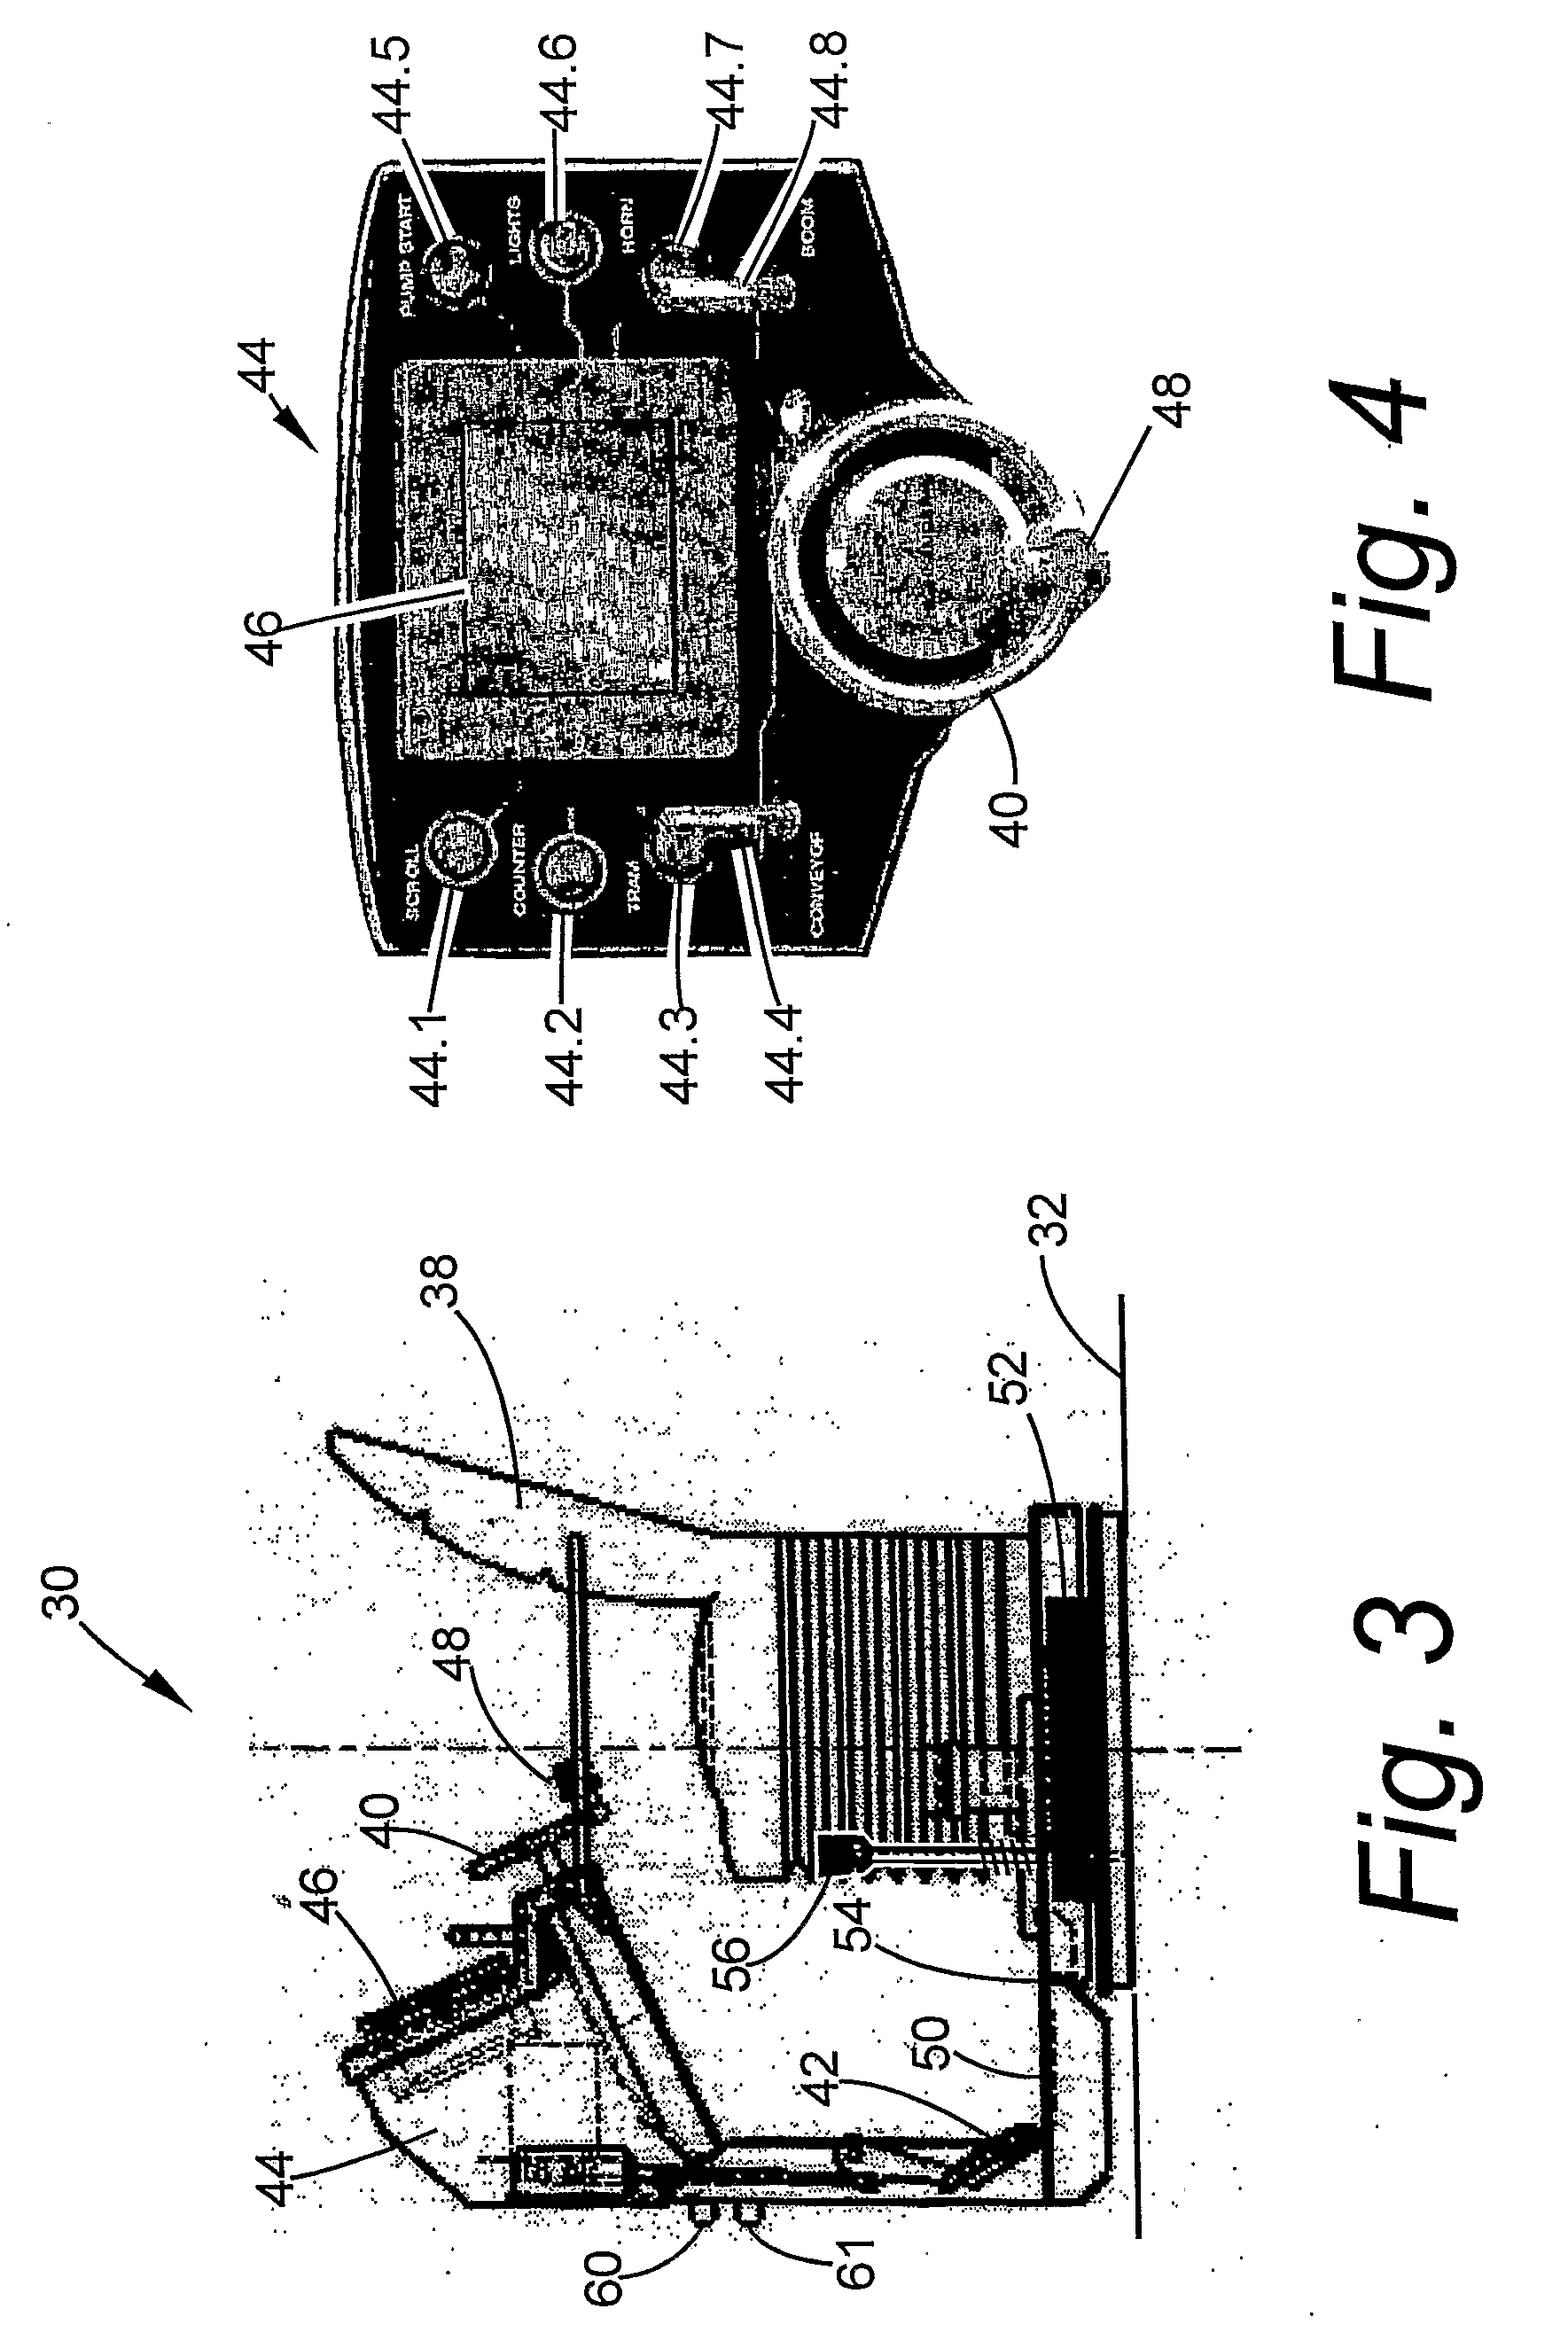 Vehicle with a variable driver position